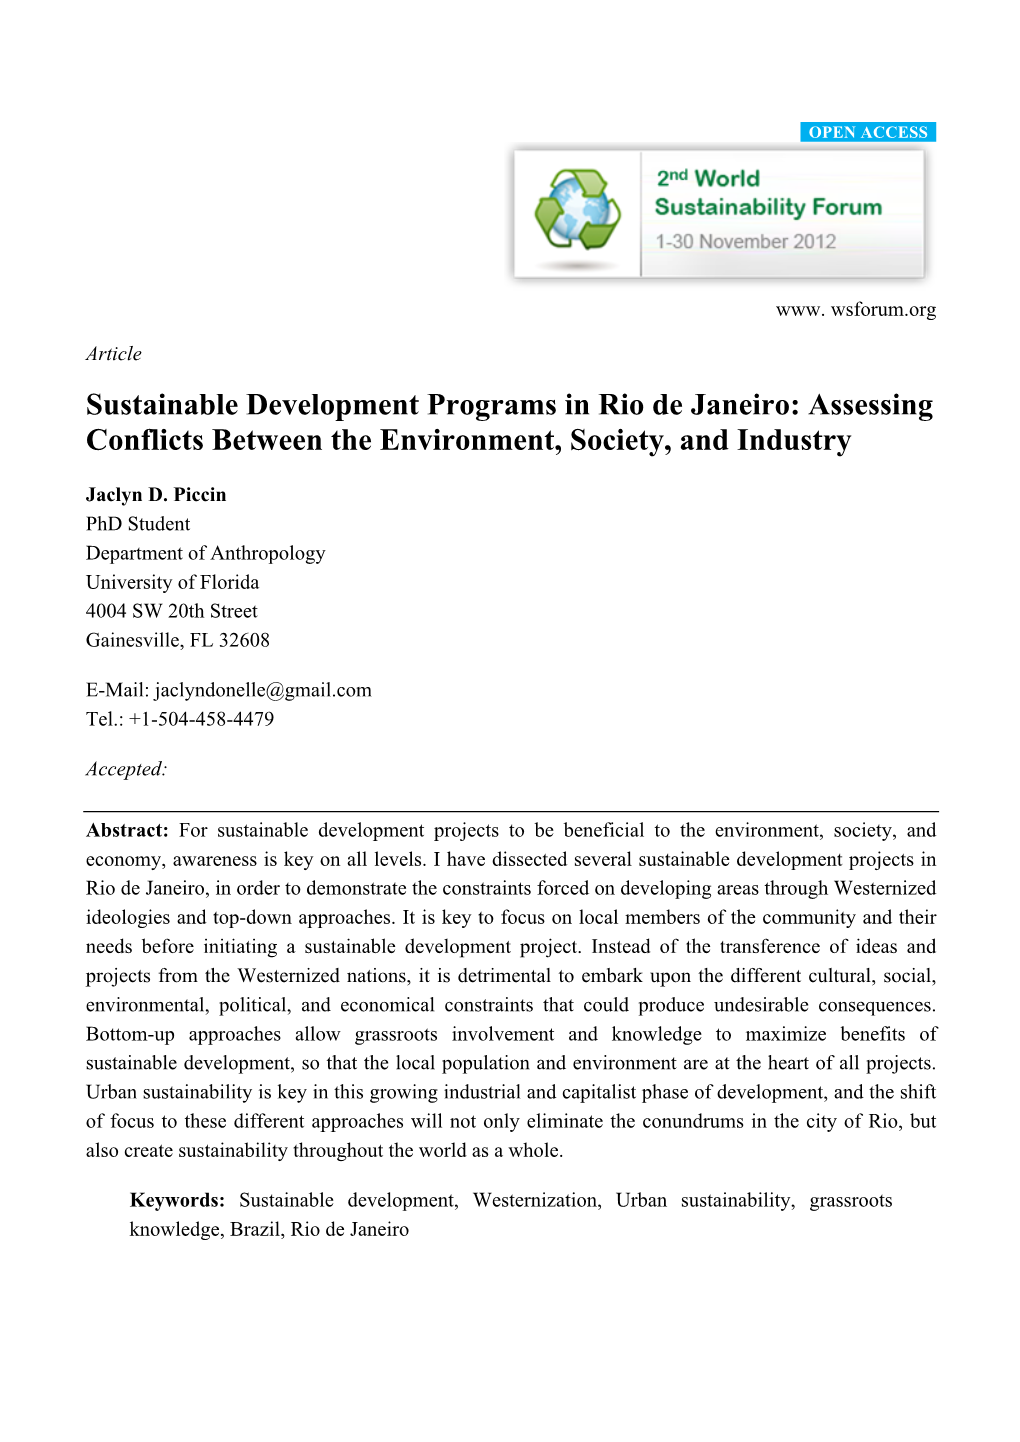 Sustainable Development Programs in Rio De Janeiro: Assessing Conflicts Between the Environment, Society, and Industry